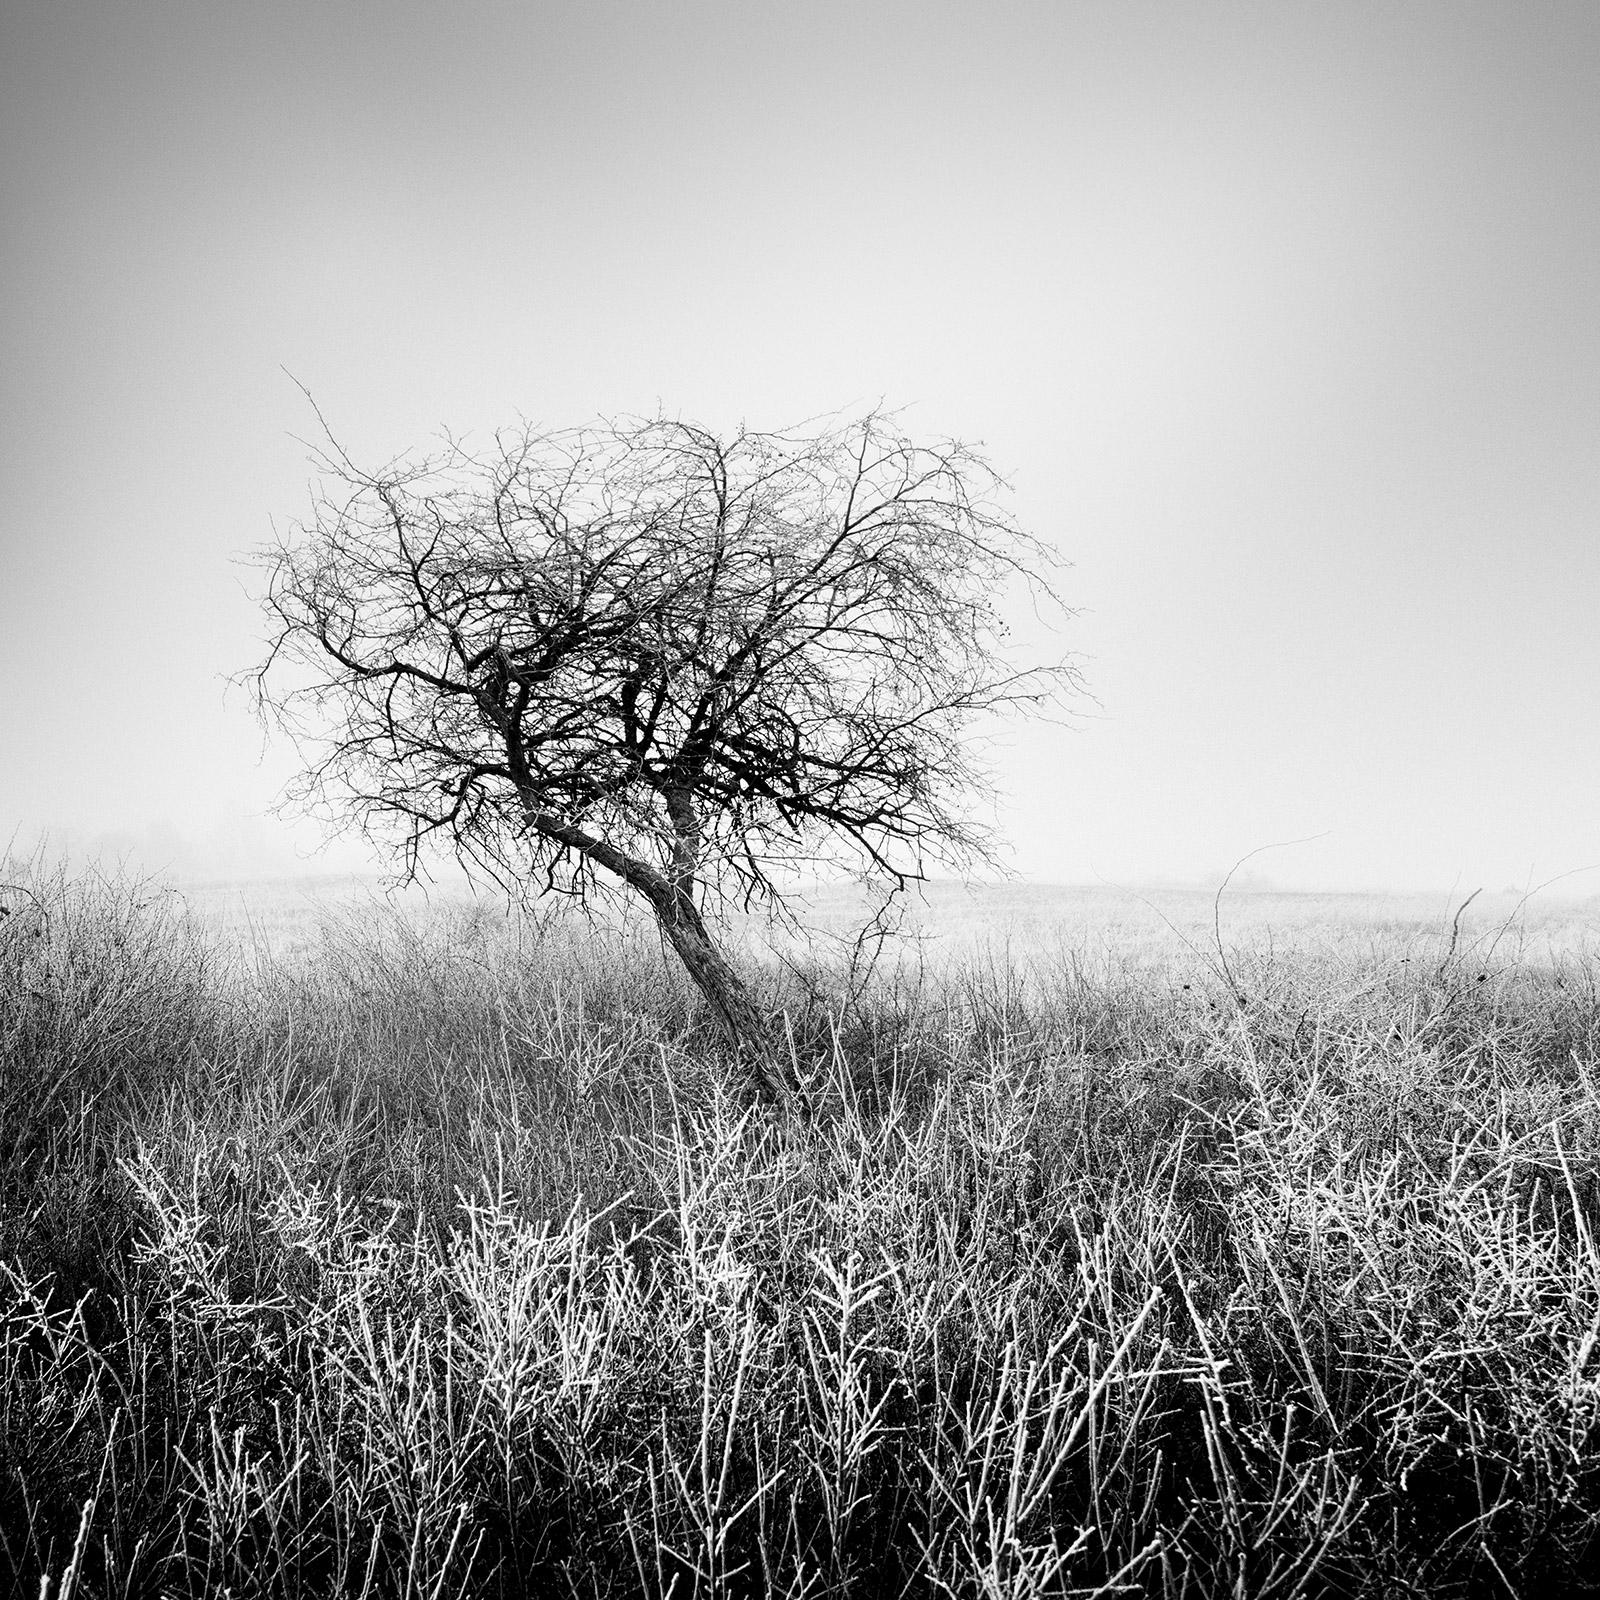 Tree in hoarfrost, frozen, Hungary, black and white art landscape photography 